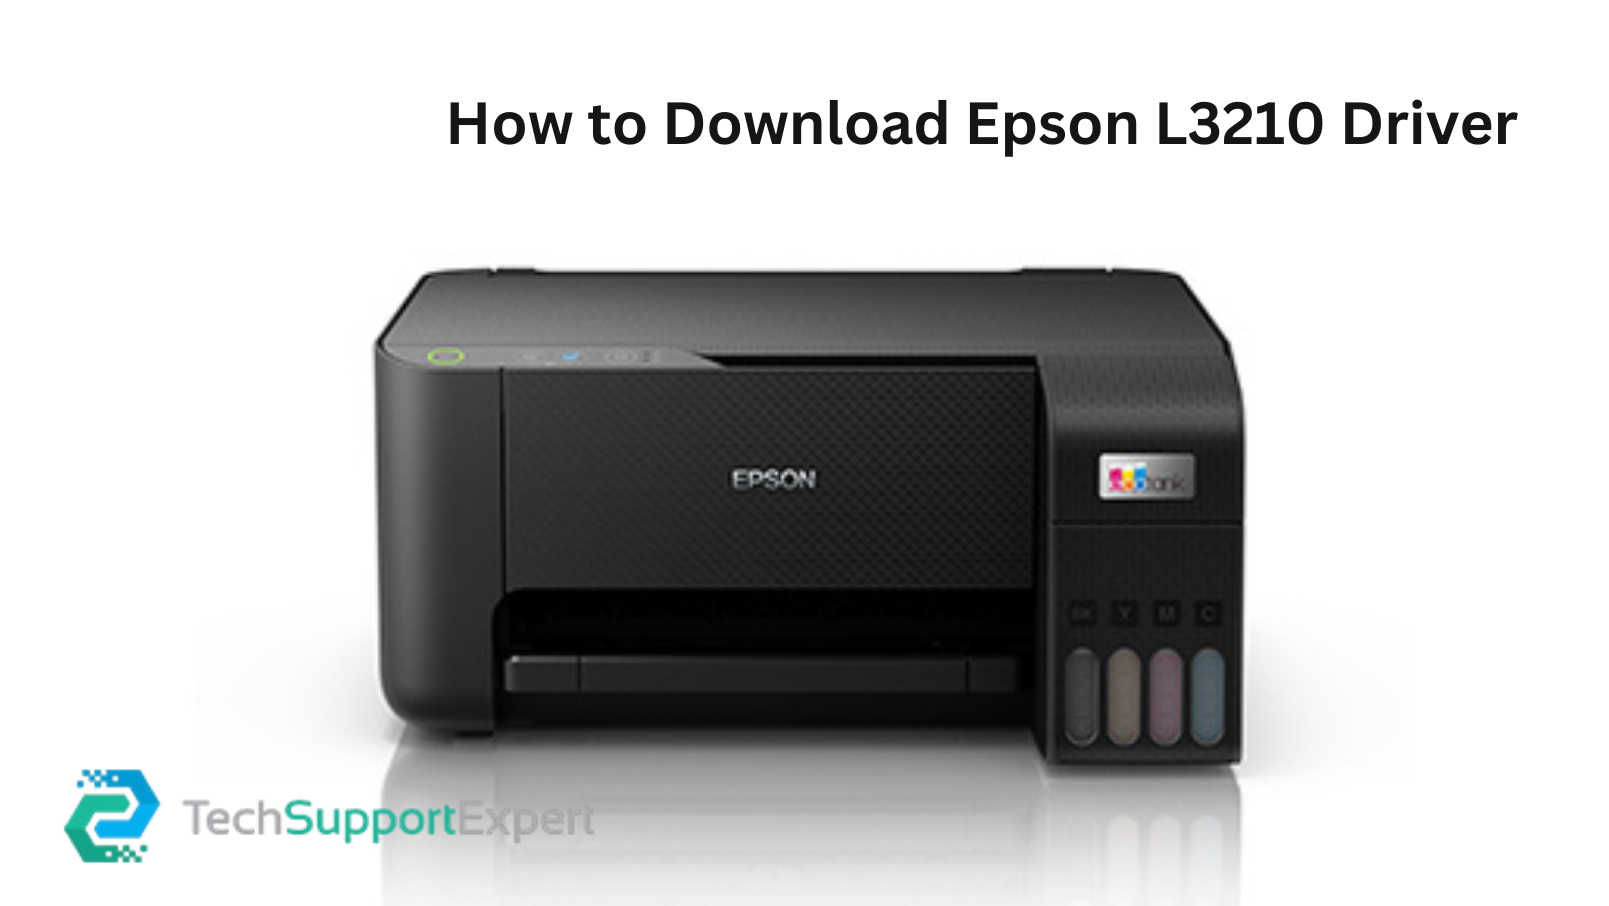 How to Download Epson L3210 Driver